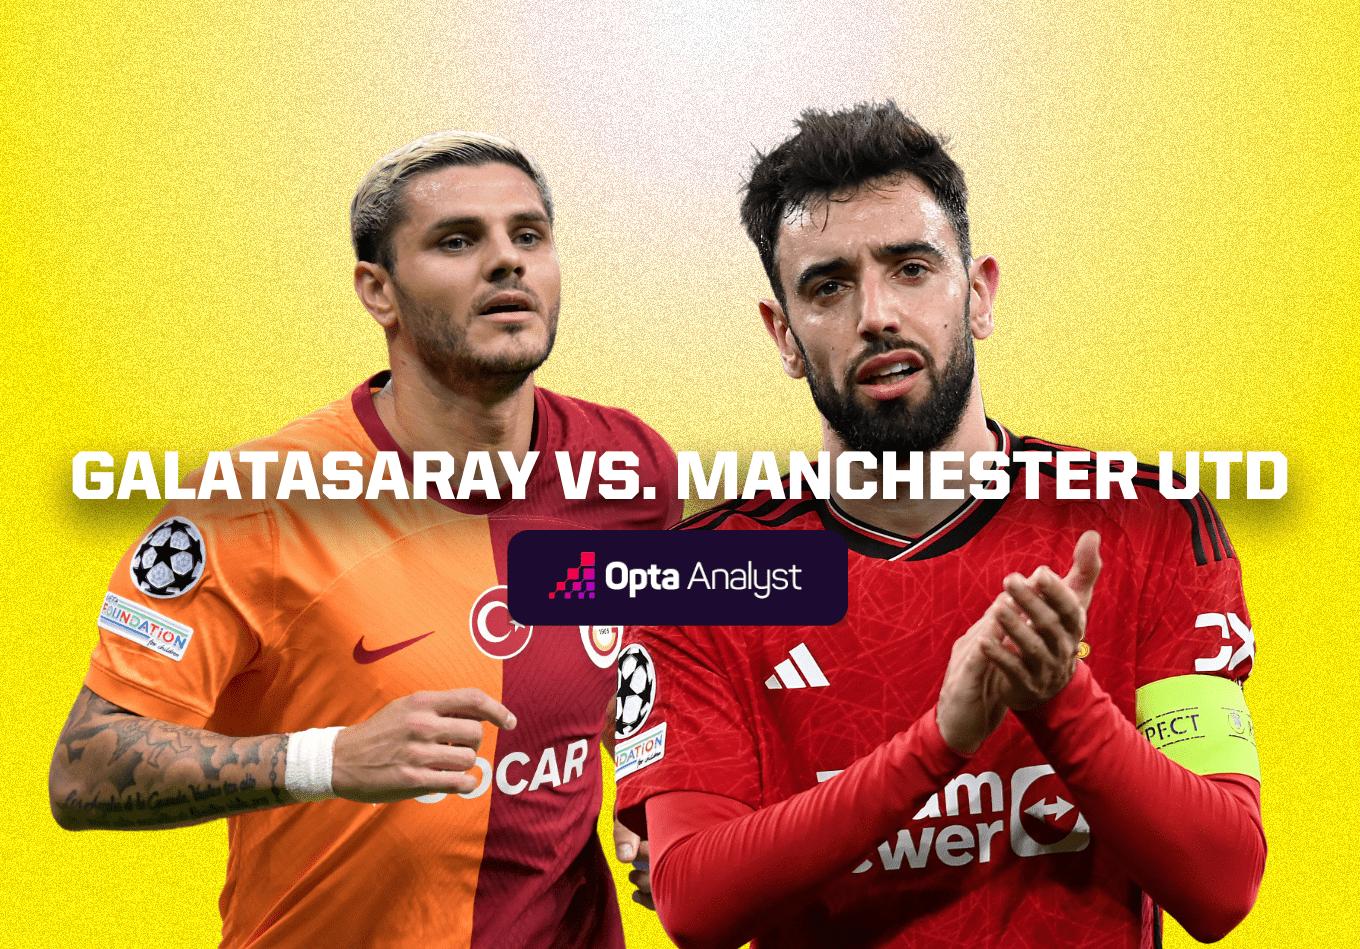 Galatasaray vs Manchester United: Prediction and Preview